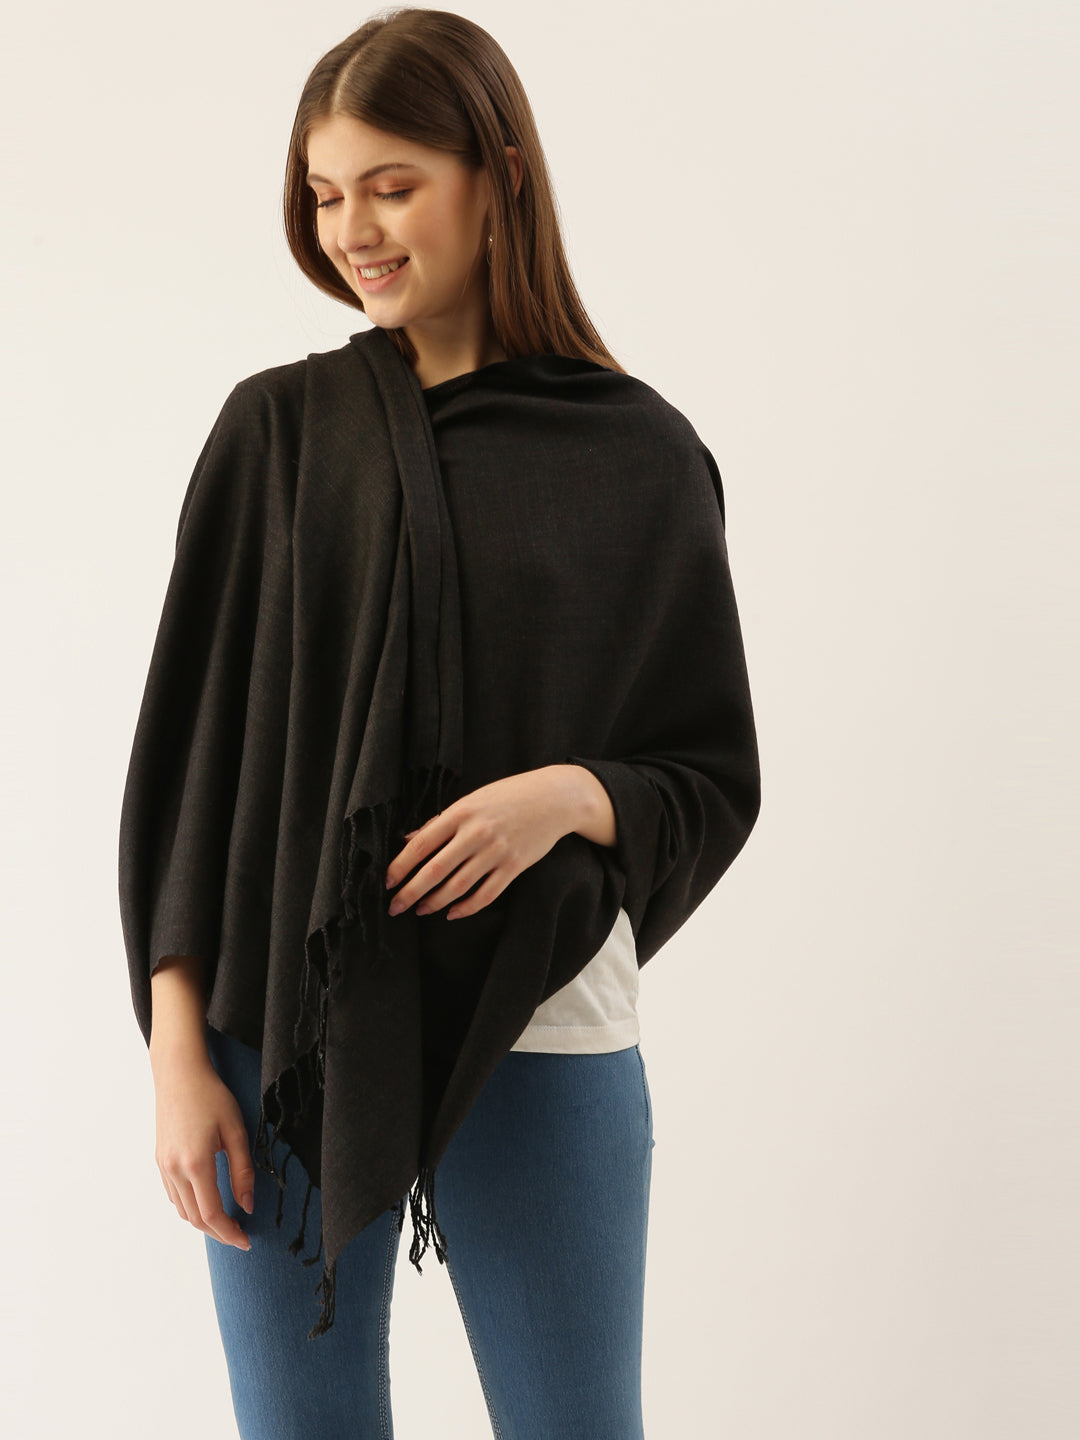 Women’s Black Solid Stole (28x80 Inches)